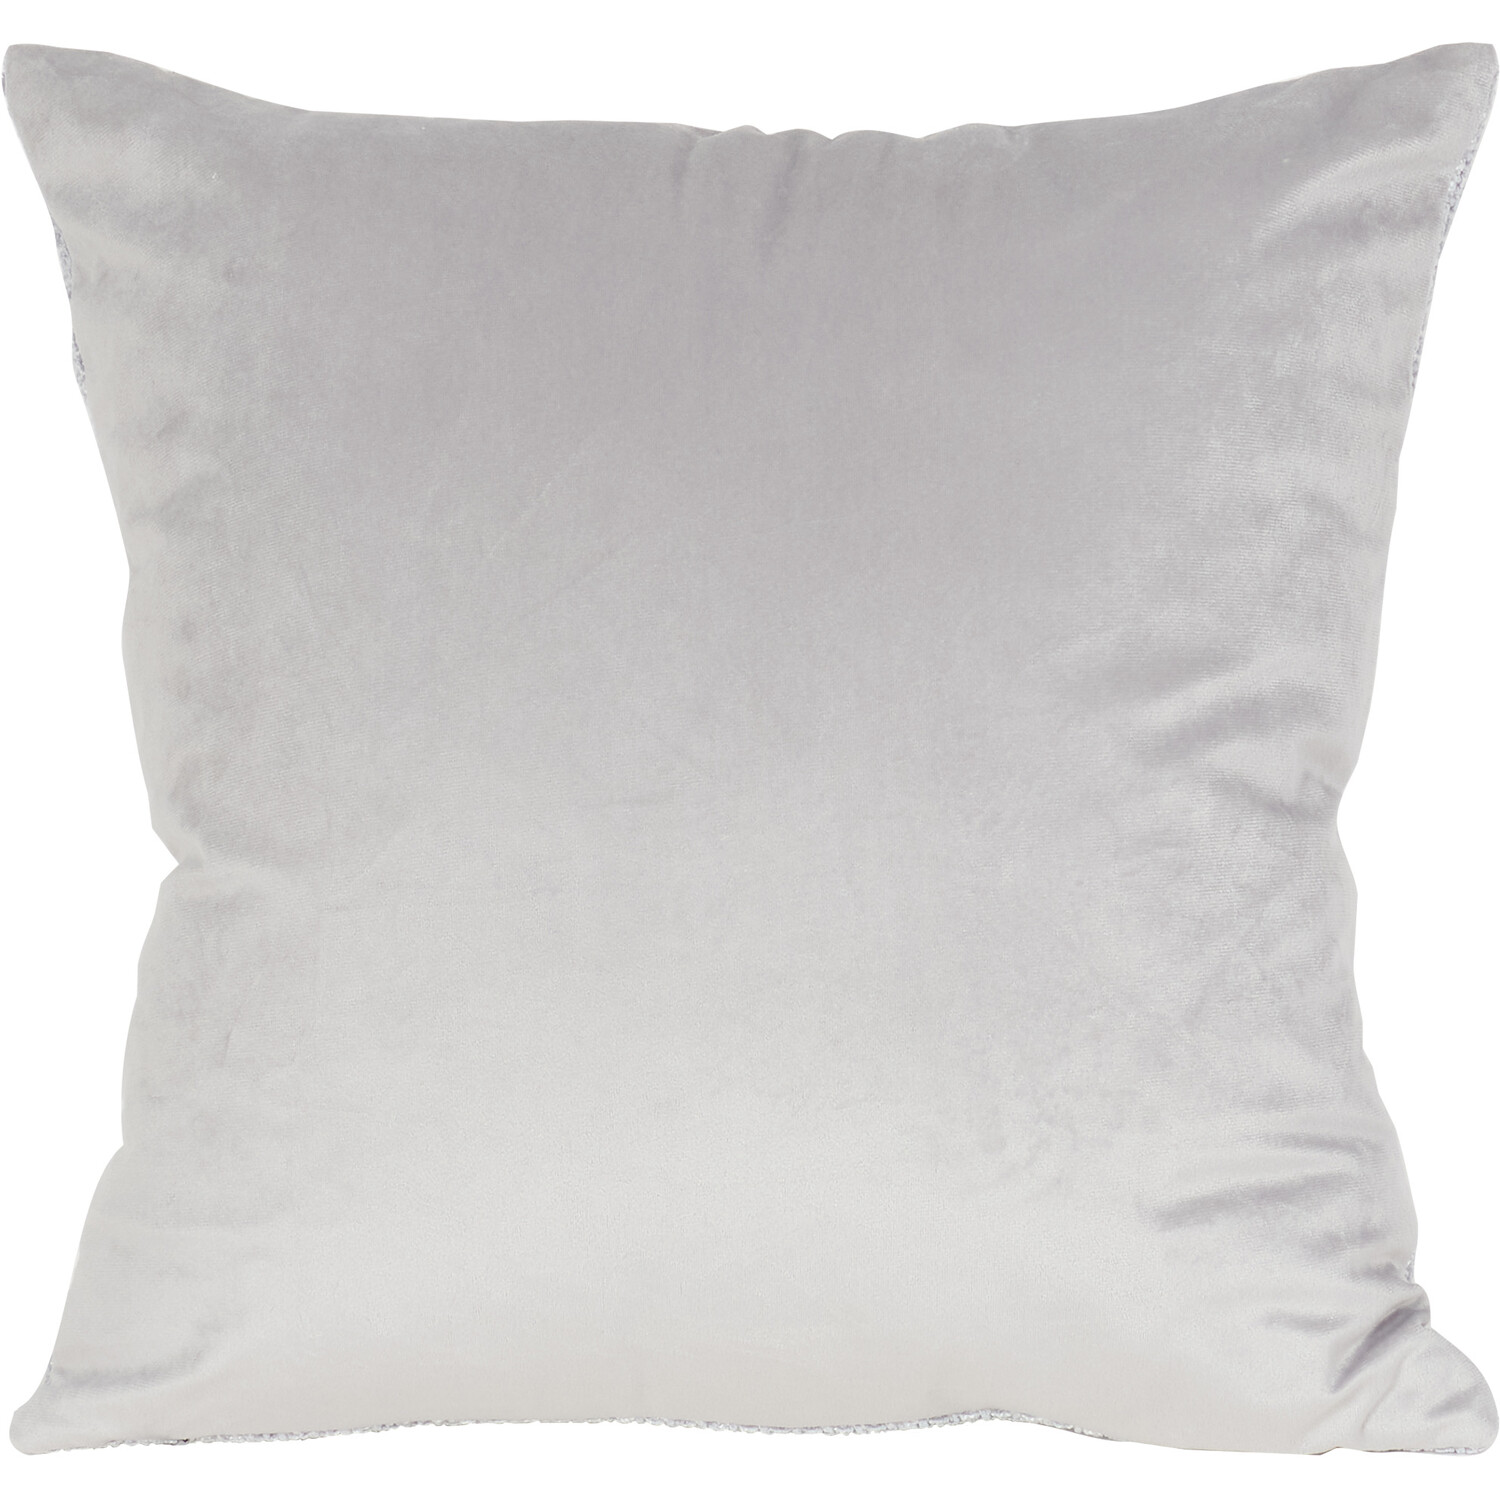 Chenille Boucle Cushion - Silver Image 2